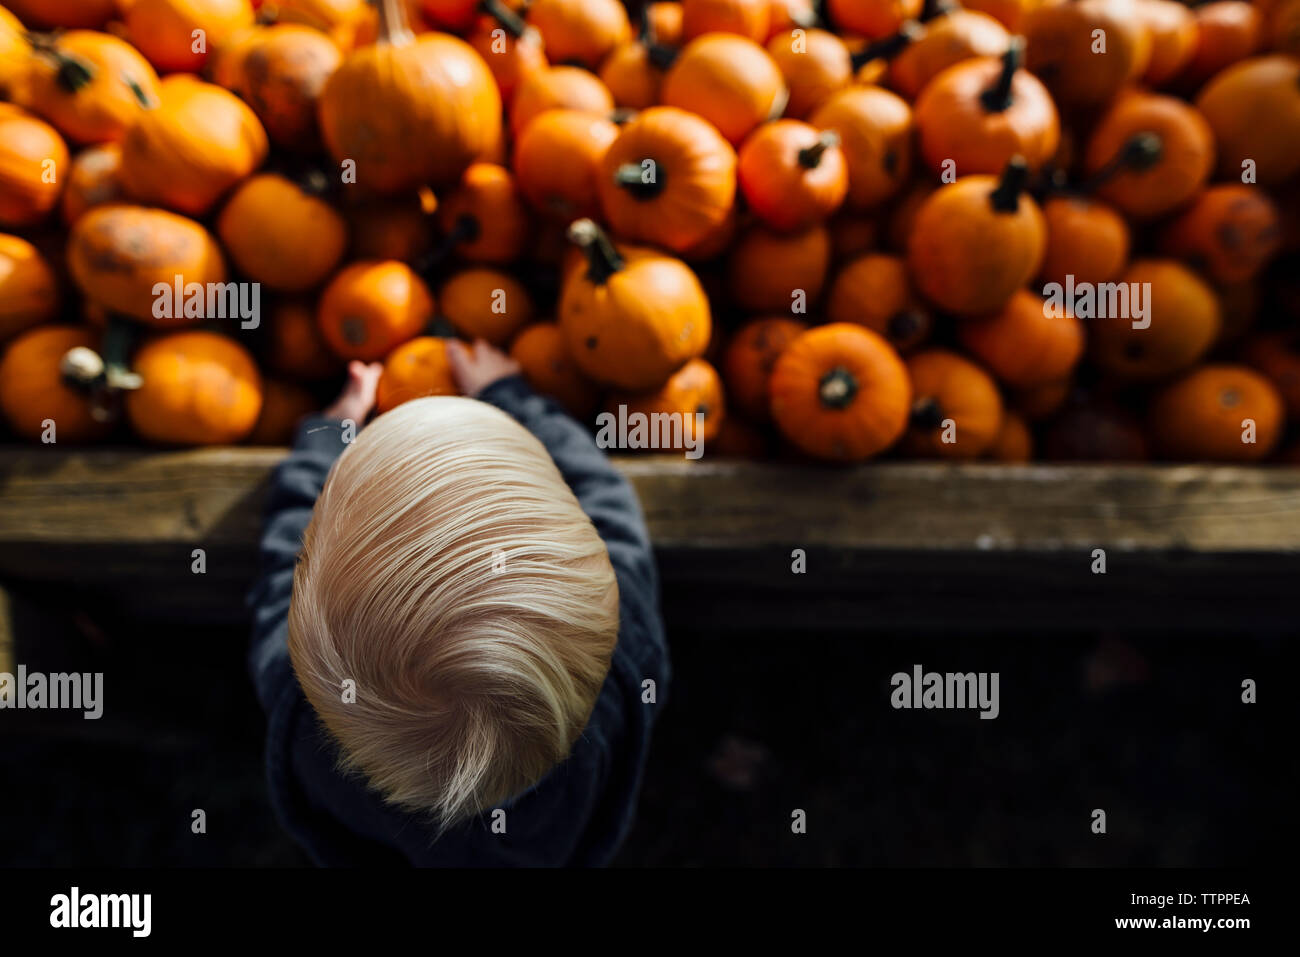 High angle view of boy taking pumpkins Stock Photo